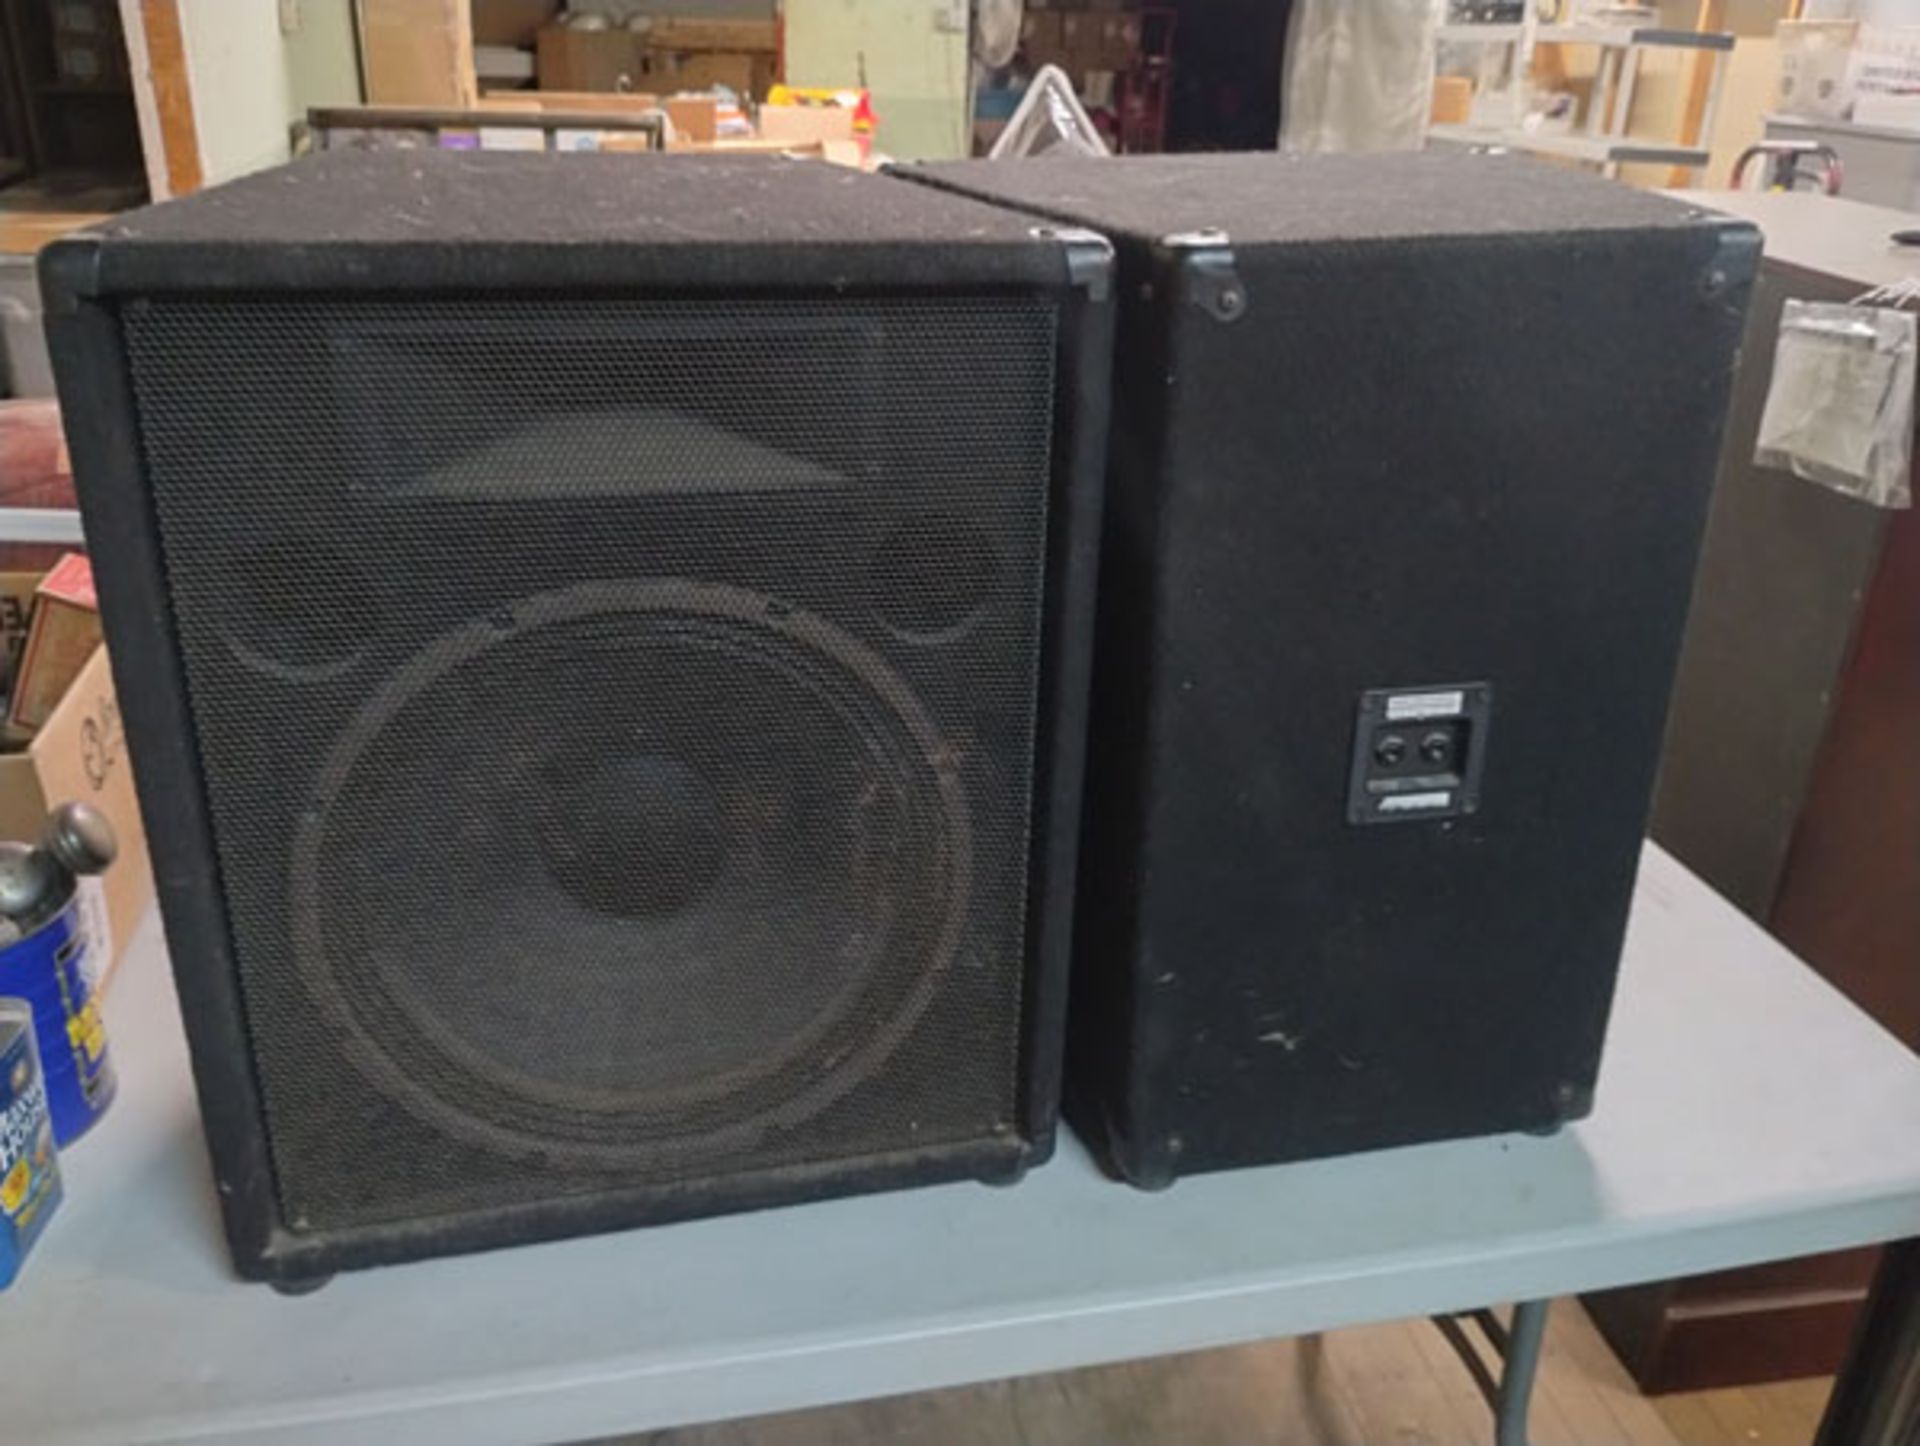 SET OF (2) 15" SPEAKERS - MODEL TRAP-115H-S1 , 250W (This lot of located at the Grossman warehouse